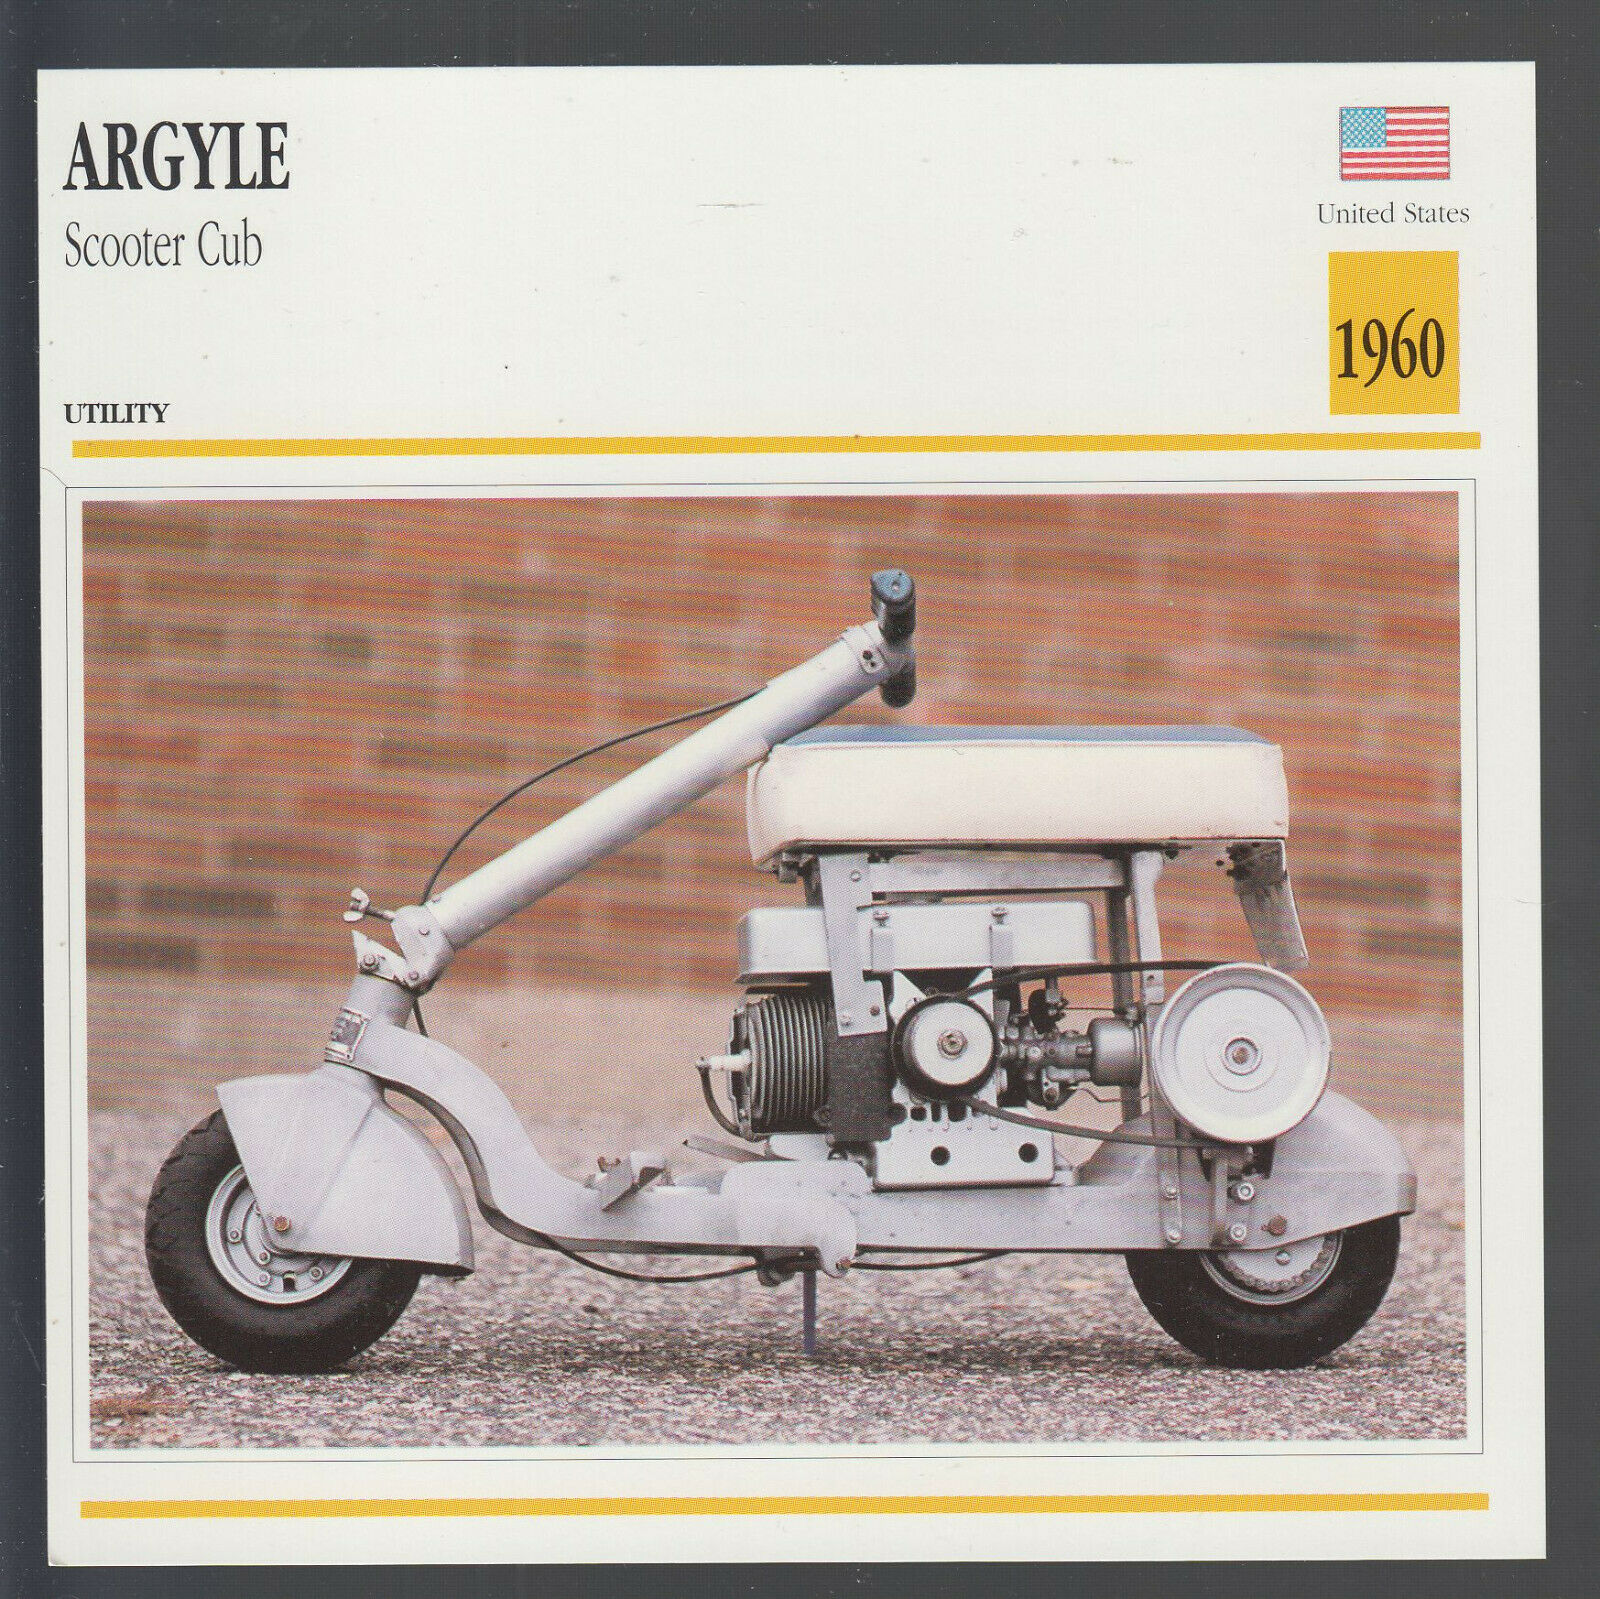 1960 Argyle Scooter Cub 2.5hp Moped Motorcycle Photo Spec Sheet Info Stat Card